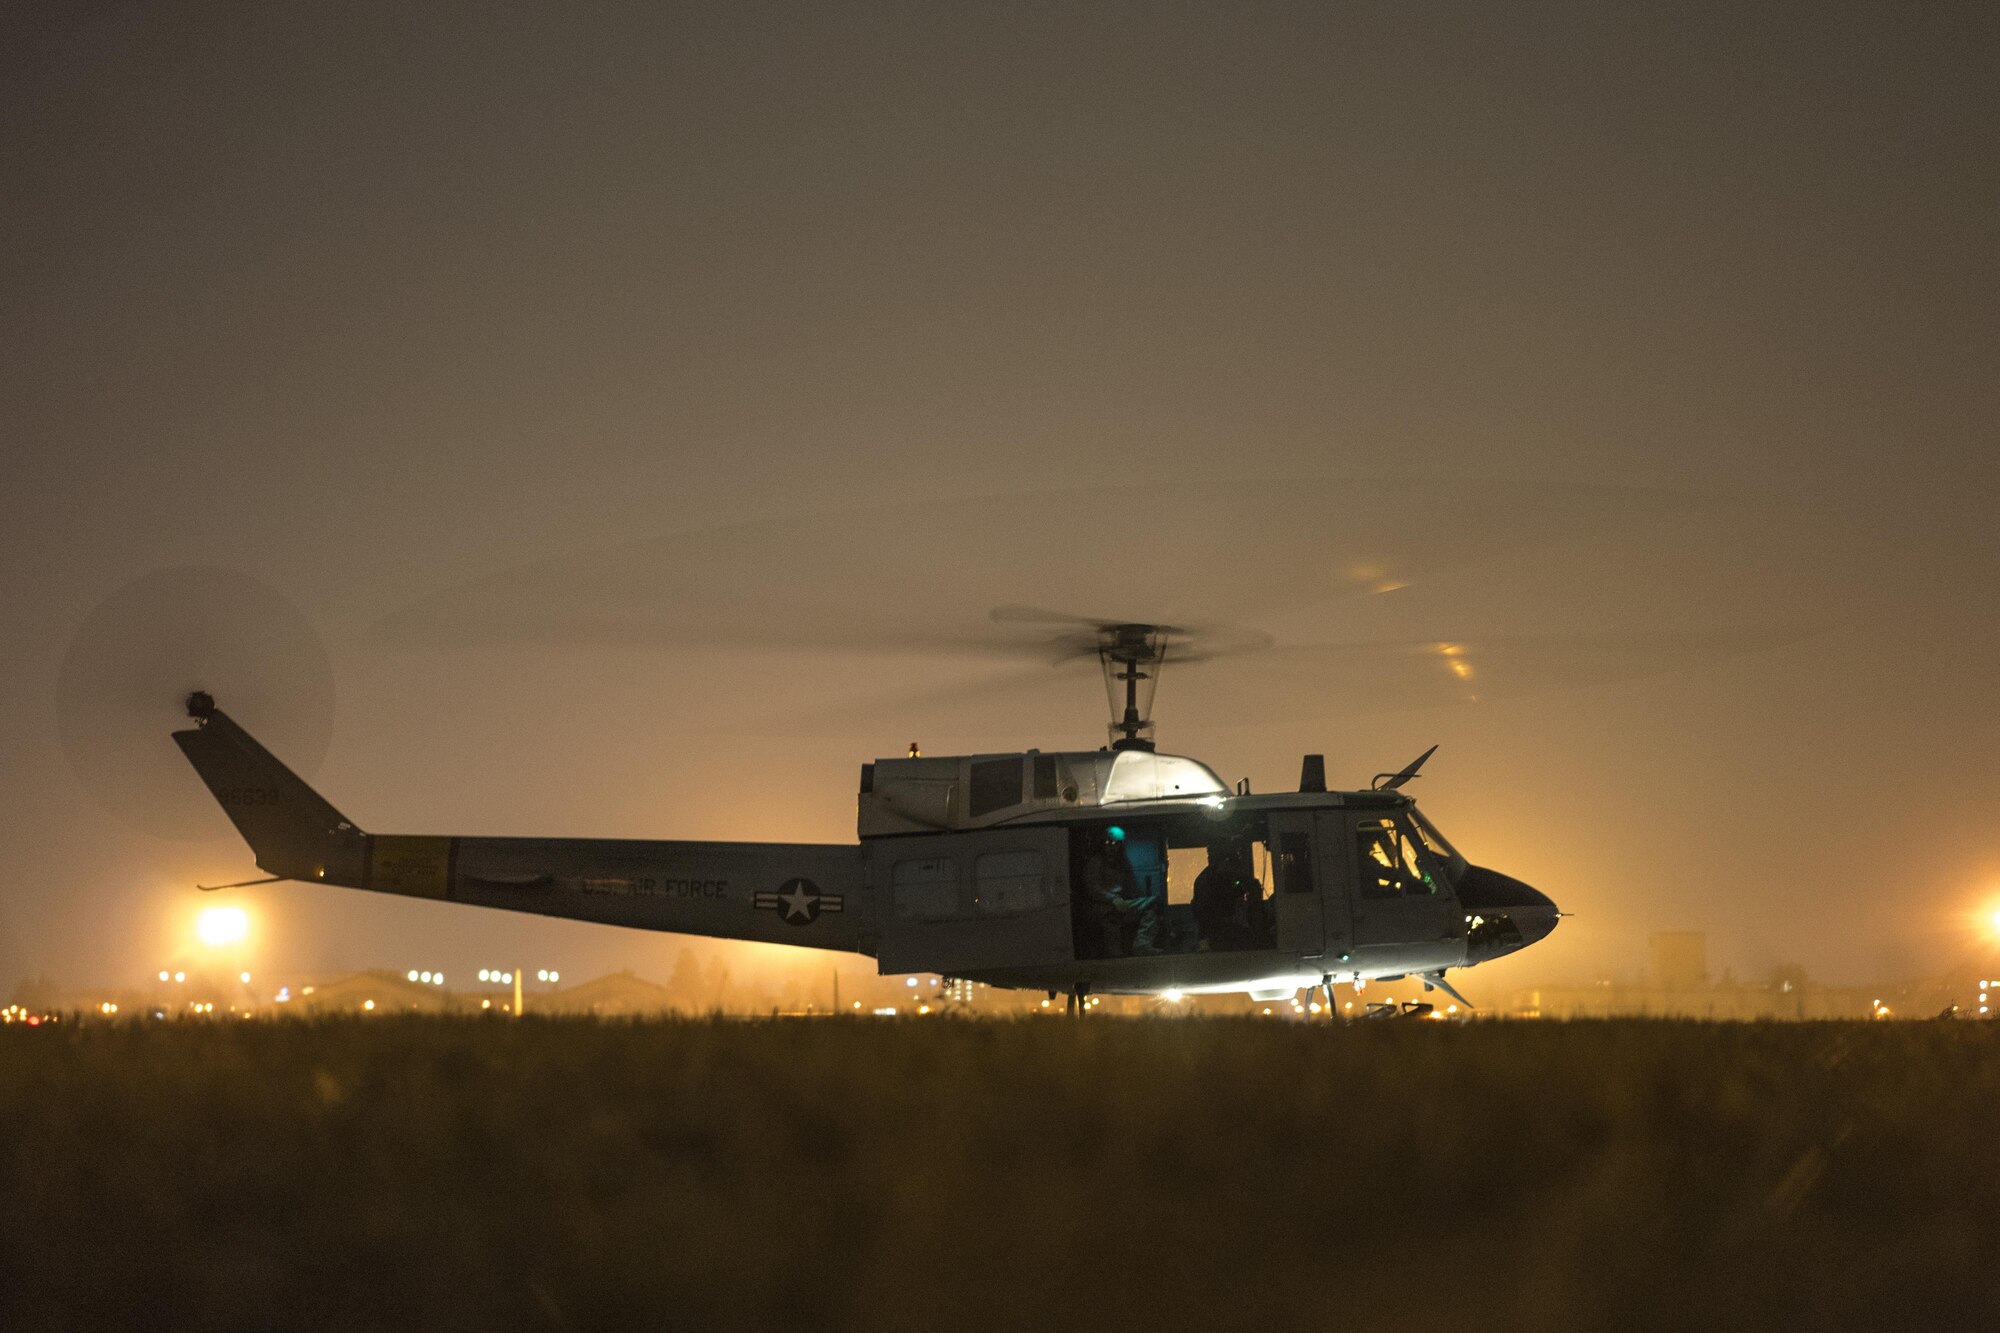 A 459th Airlift Squadron UH-1N Huey prepares for flight at Yokota Air Base, Japan, Feb. 23, 2016. The 459th AS recently improved their search and rescue capabilities by outfitting two Hueys with new rescue hoists. (U.S. Air Force photo by Airman 1st Class Delano Scott/Released)